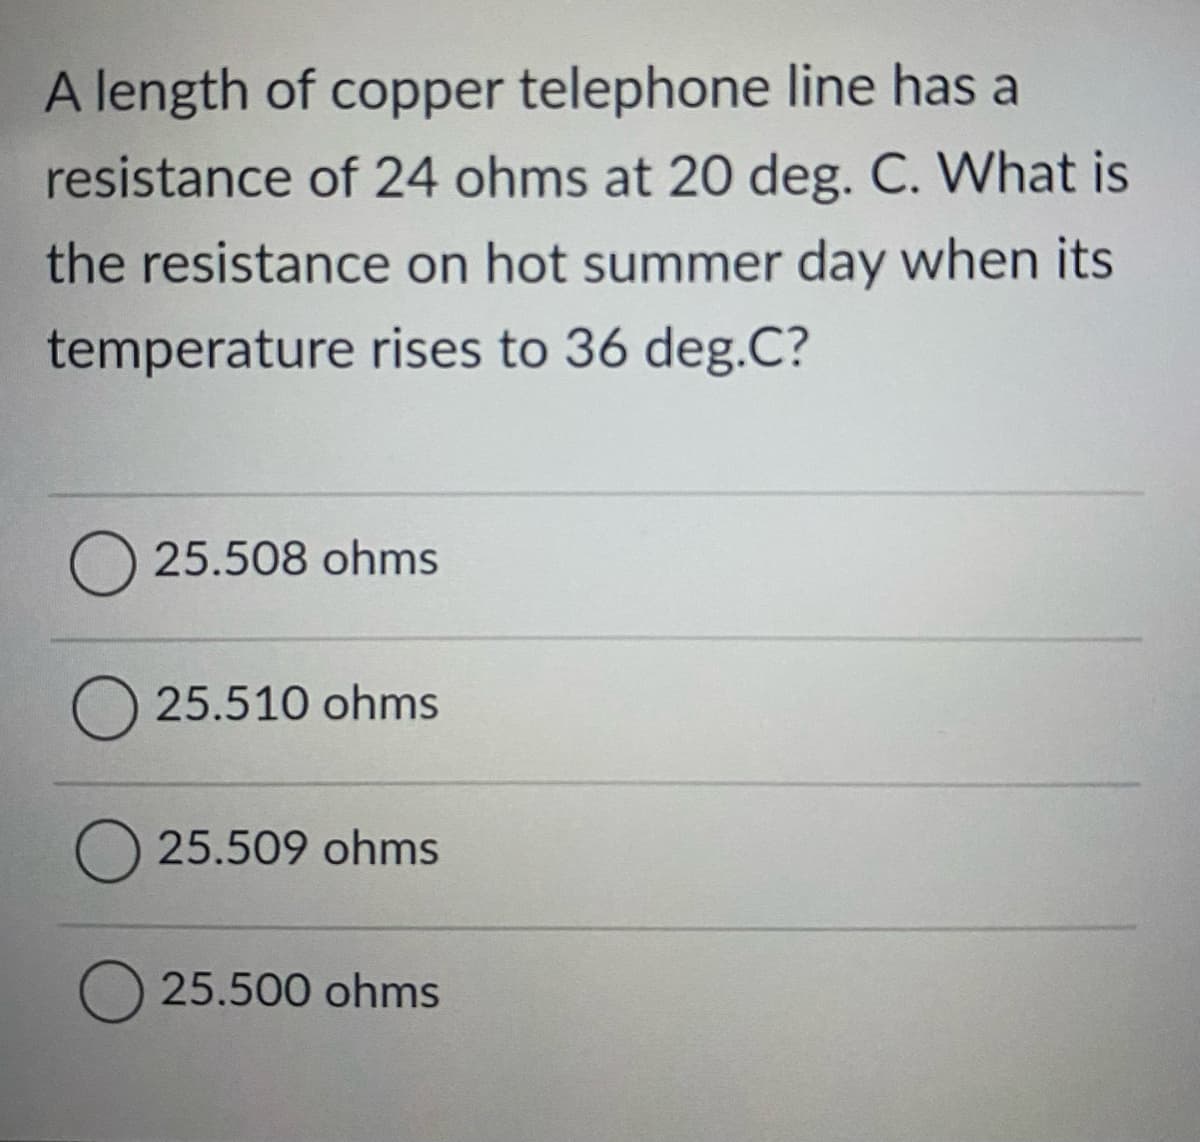 A length of copper telephone line has a
resistance of 24 ohms at 20 deg. C. What is
the resistance on hot summer day when its
temperature rises to 36 deg.C?
O 25.508 ohms
O 25.510 ohms
25.509 ohms
25.500 ohms
